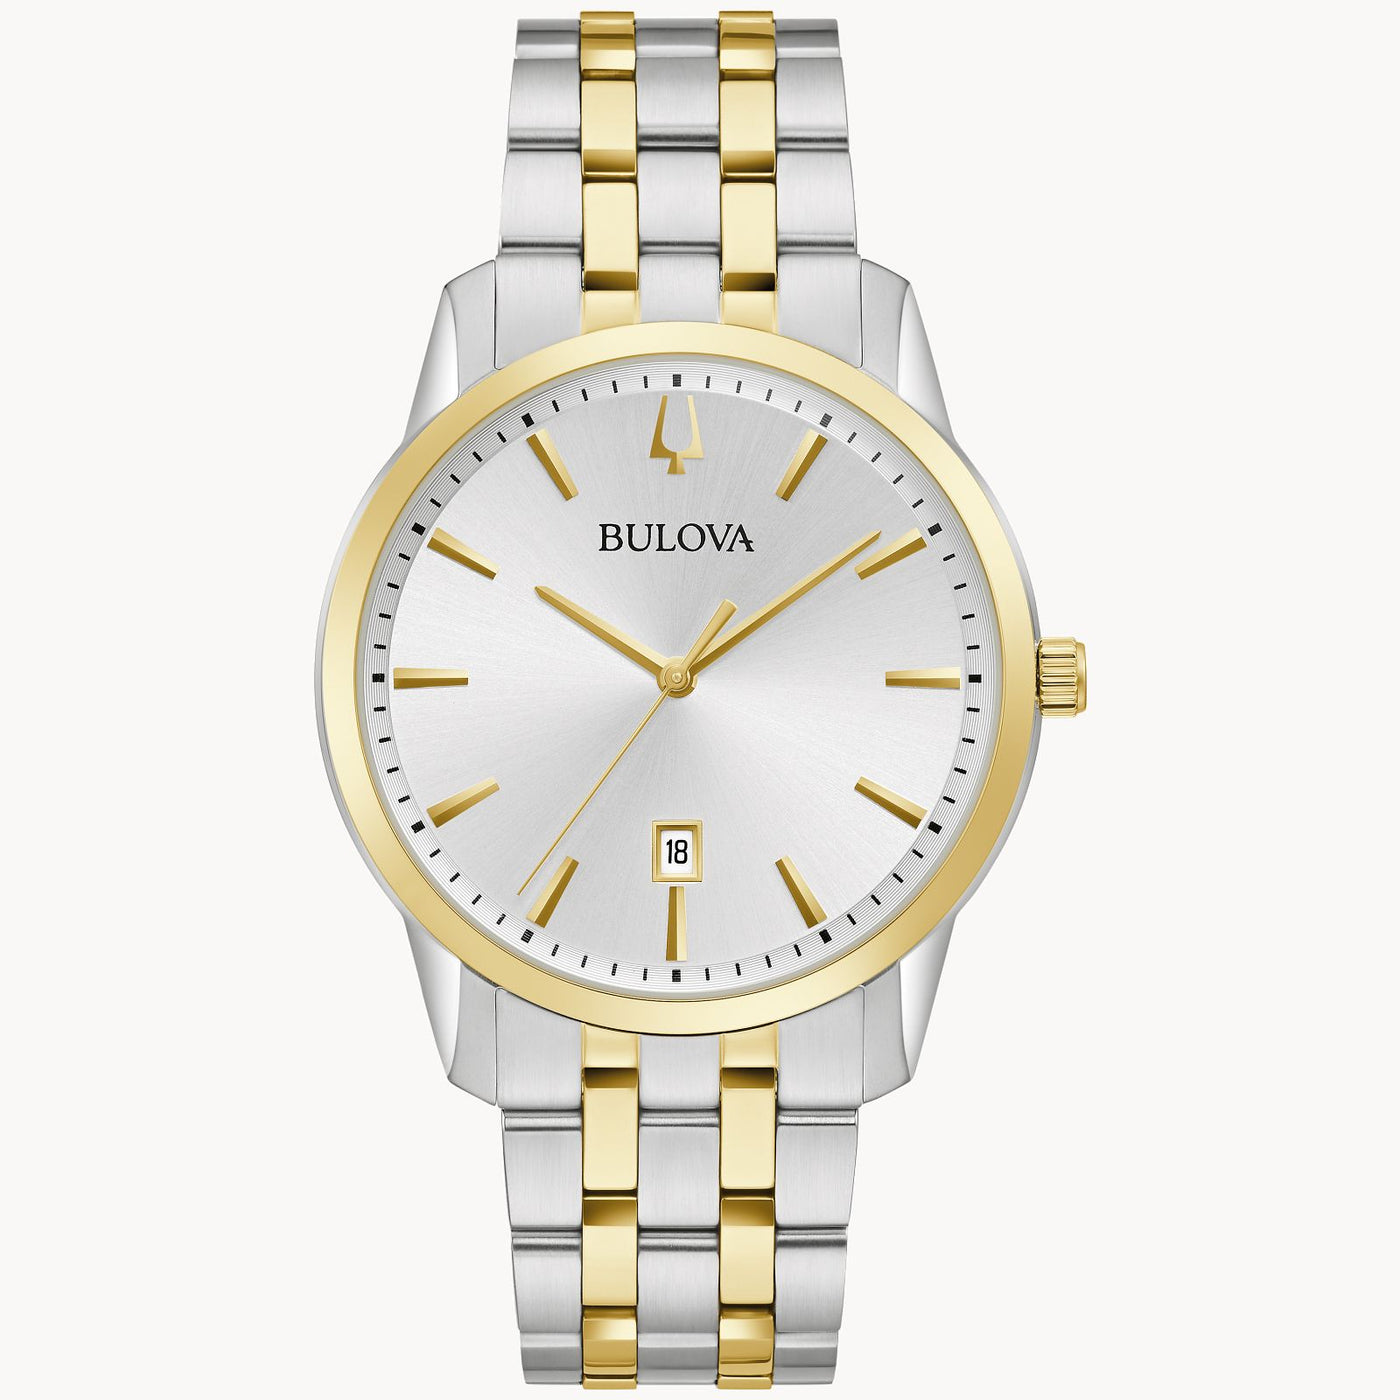 Gent's Two-Tone Bulova "Sutton" Watch with Silver White Dial